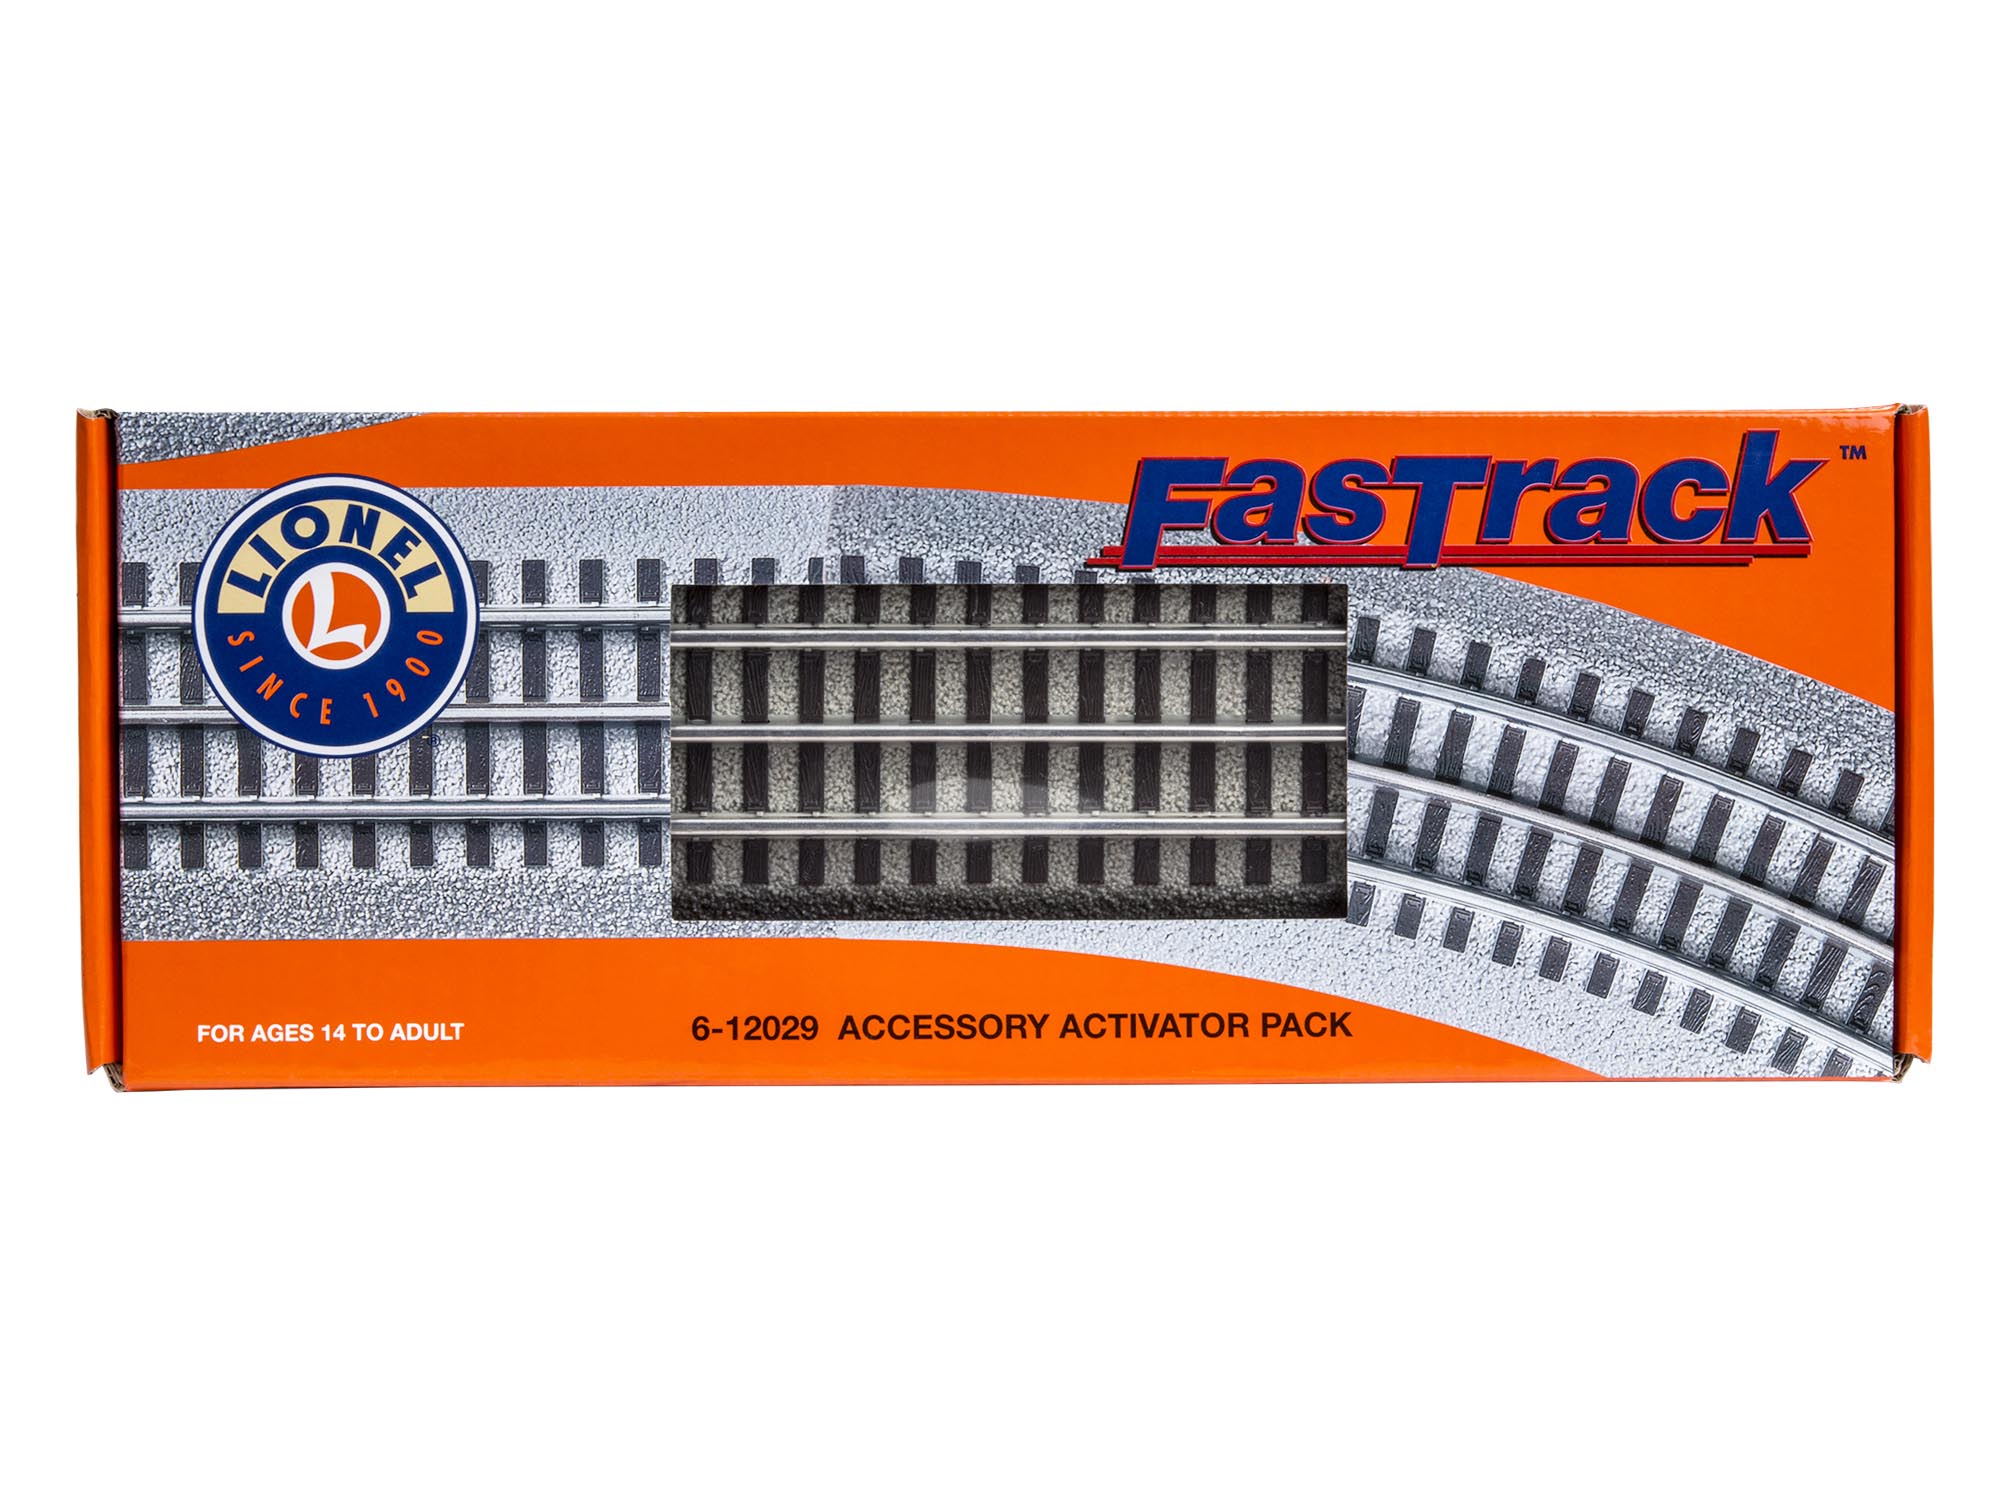 Lionel FasTrack Accessory Activator Extender